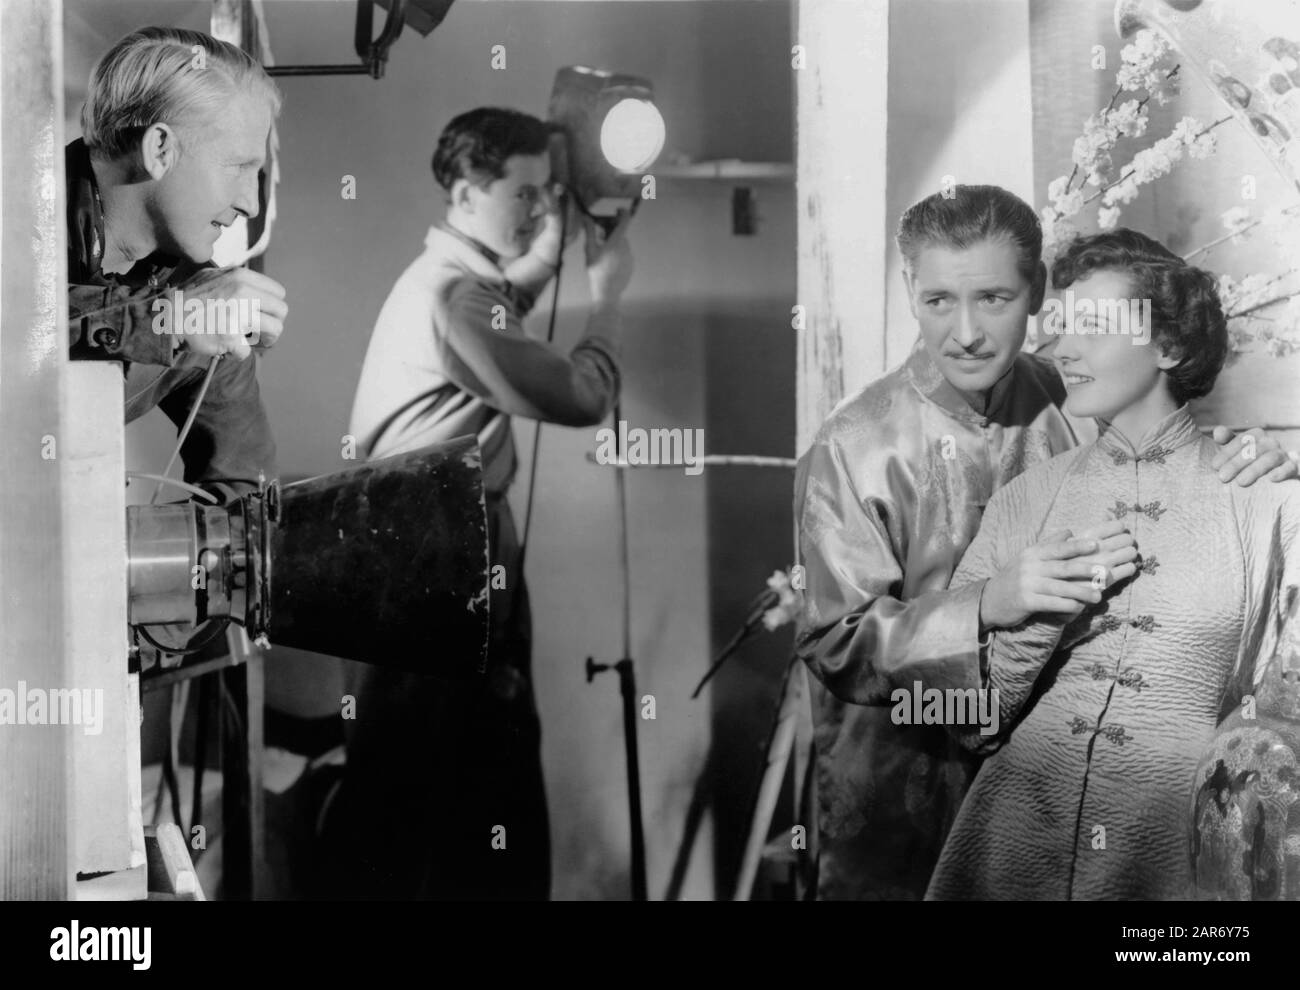 Still Photographer A. L. '' WHITEY '' SCHAFER and Assistant JOHN REED take publicity portraits of RONALD COLMAN as Robert Conway and JANE WYATT as Sondra for LOST HORIZON 1937 director FRANK CAPRA novel JAMES HILTON screenplay ROBERT RISKIN Columbia Pictures Stock Photo